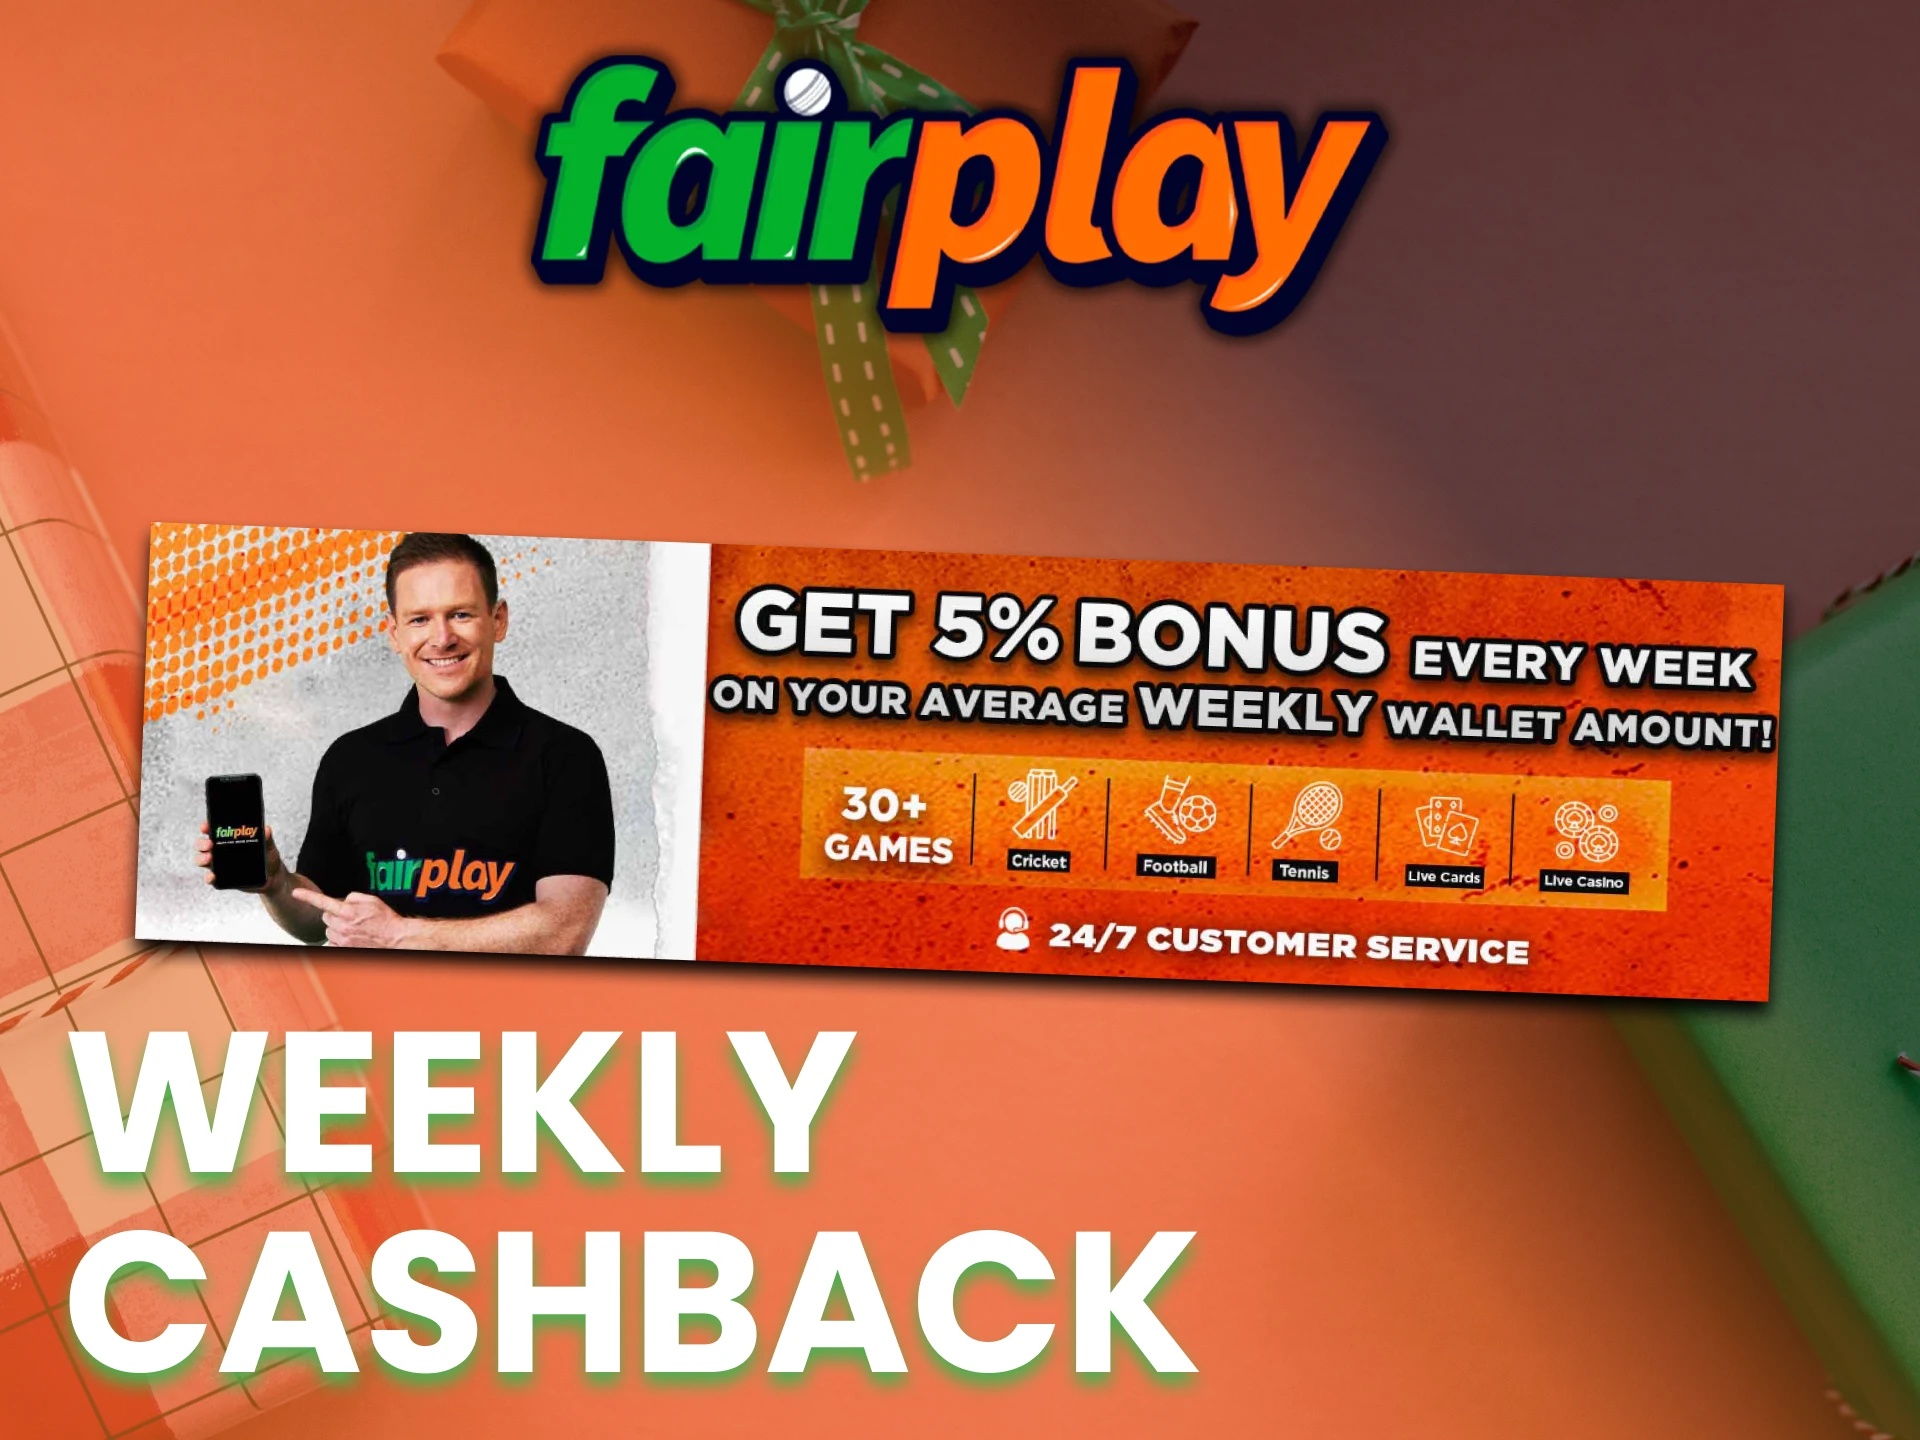 Get cashback money after each bet at Fairplay.